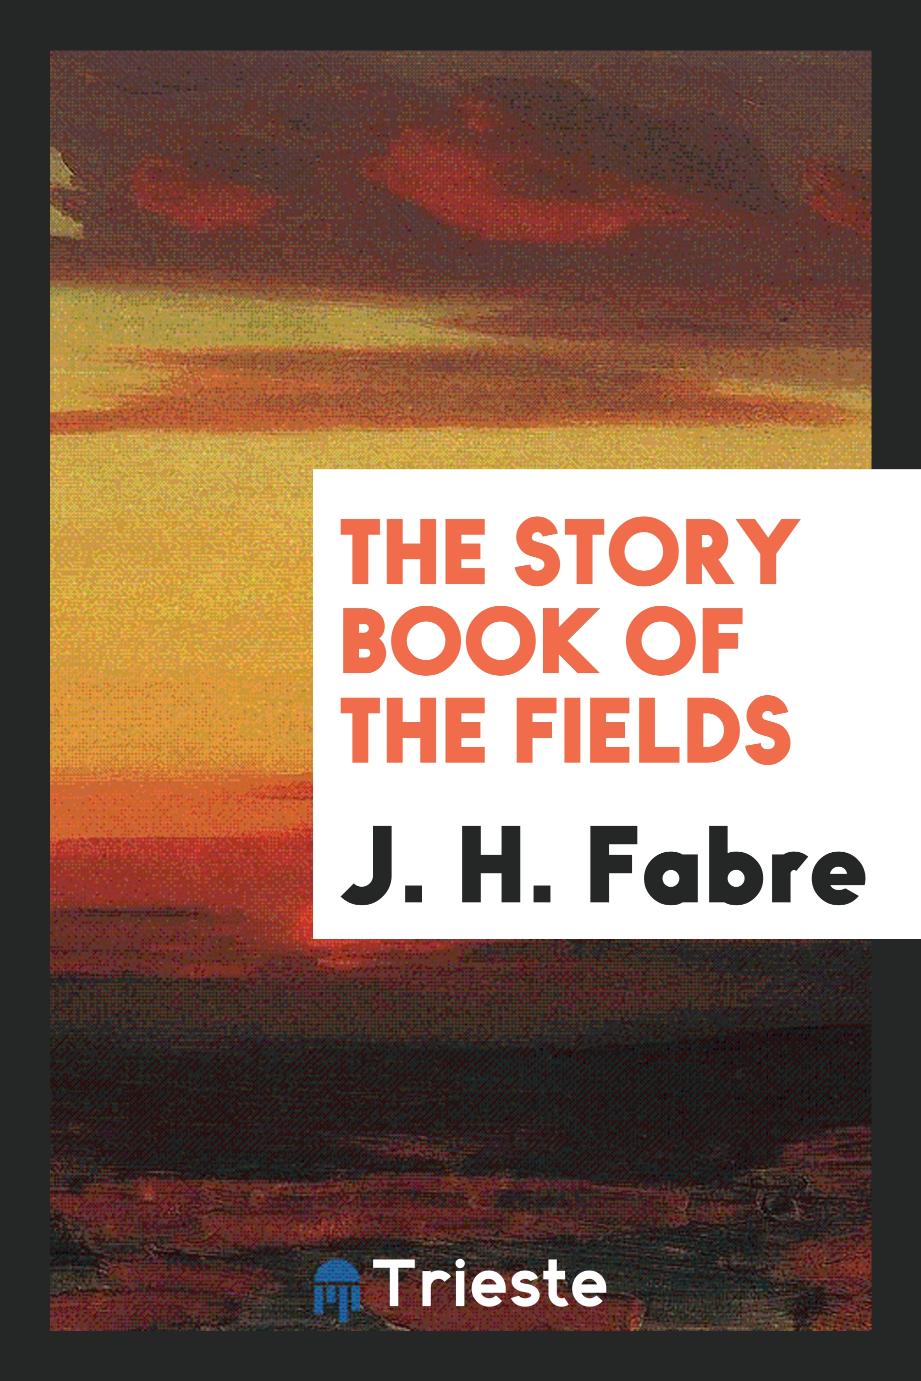 The story book of the fields